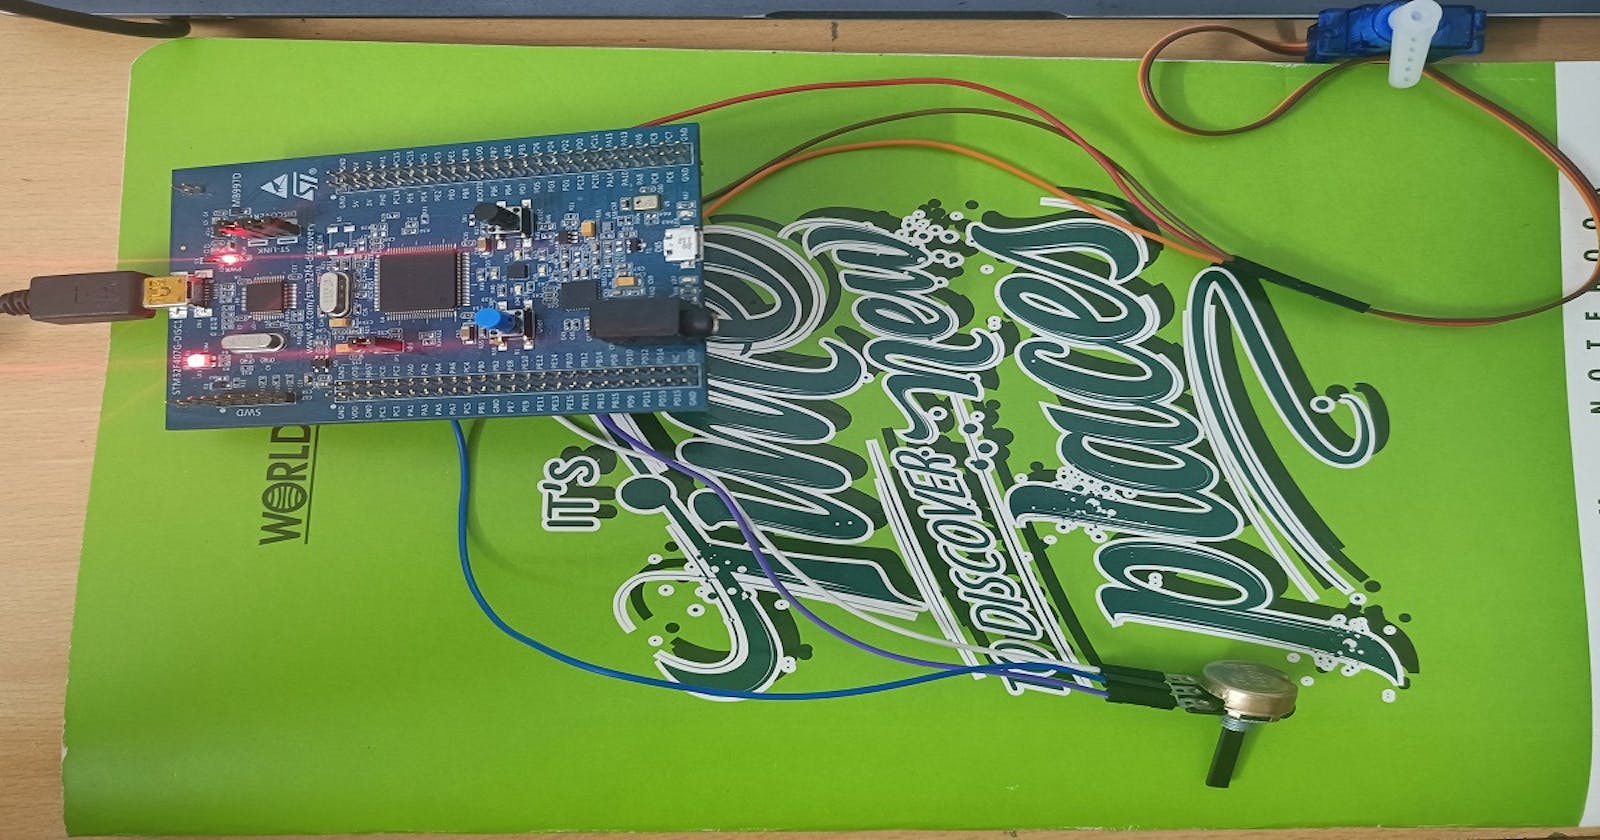 Servo Motor Control with a Potentiometer using the STM32F407 Discovery Kit